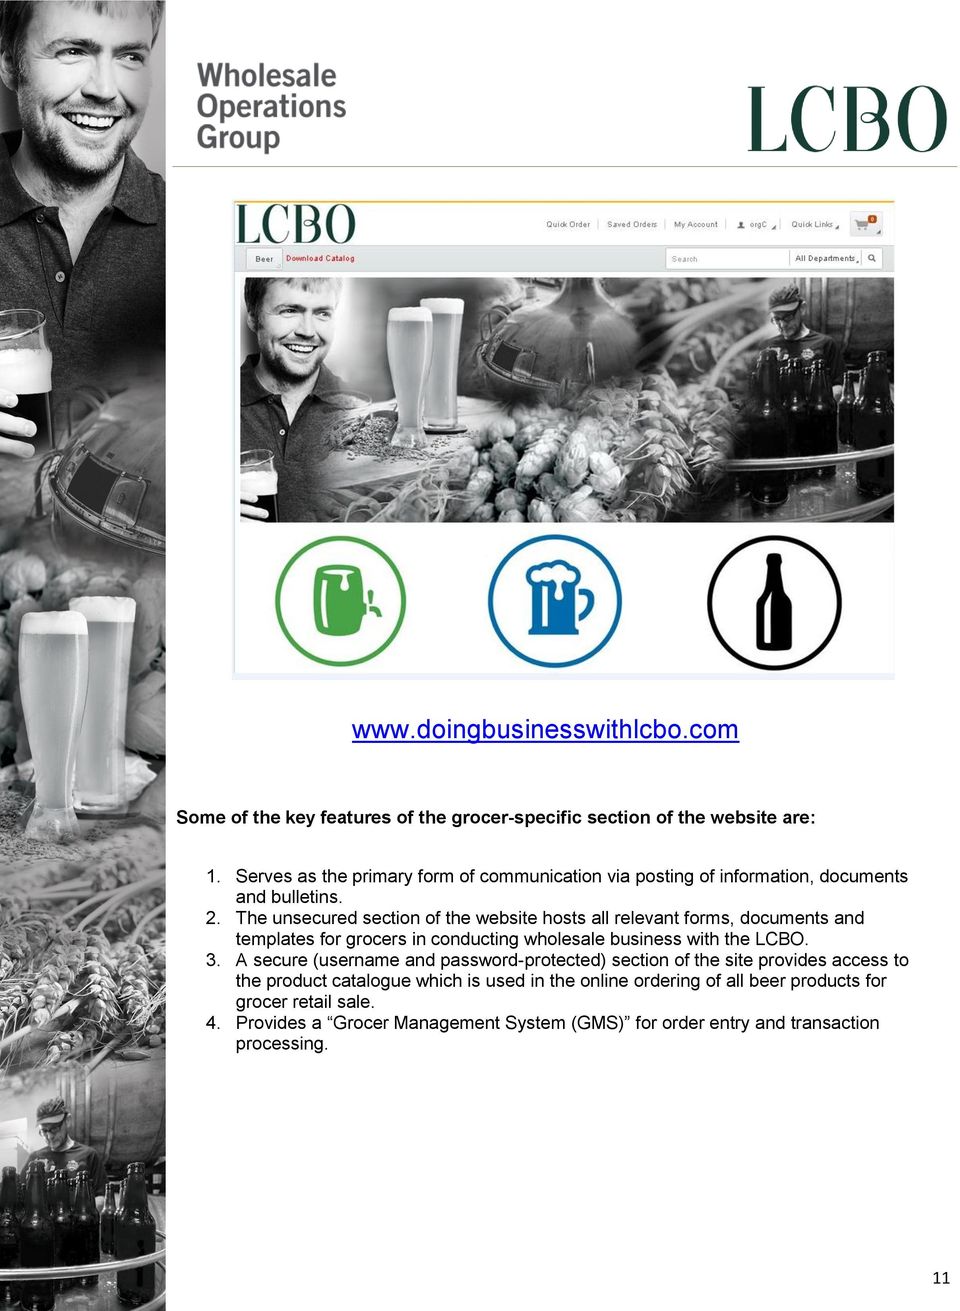 The unsecured section of the website hosts all relevant forms, documents and templates for grocers in conducting wholesale business with the LCBO. 3.